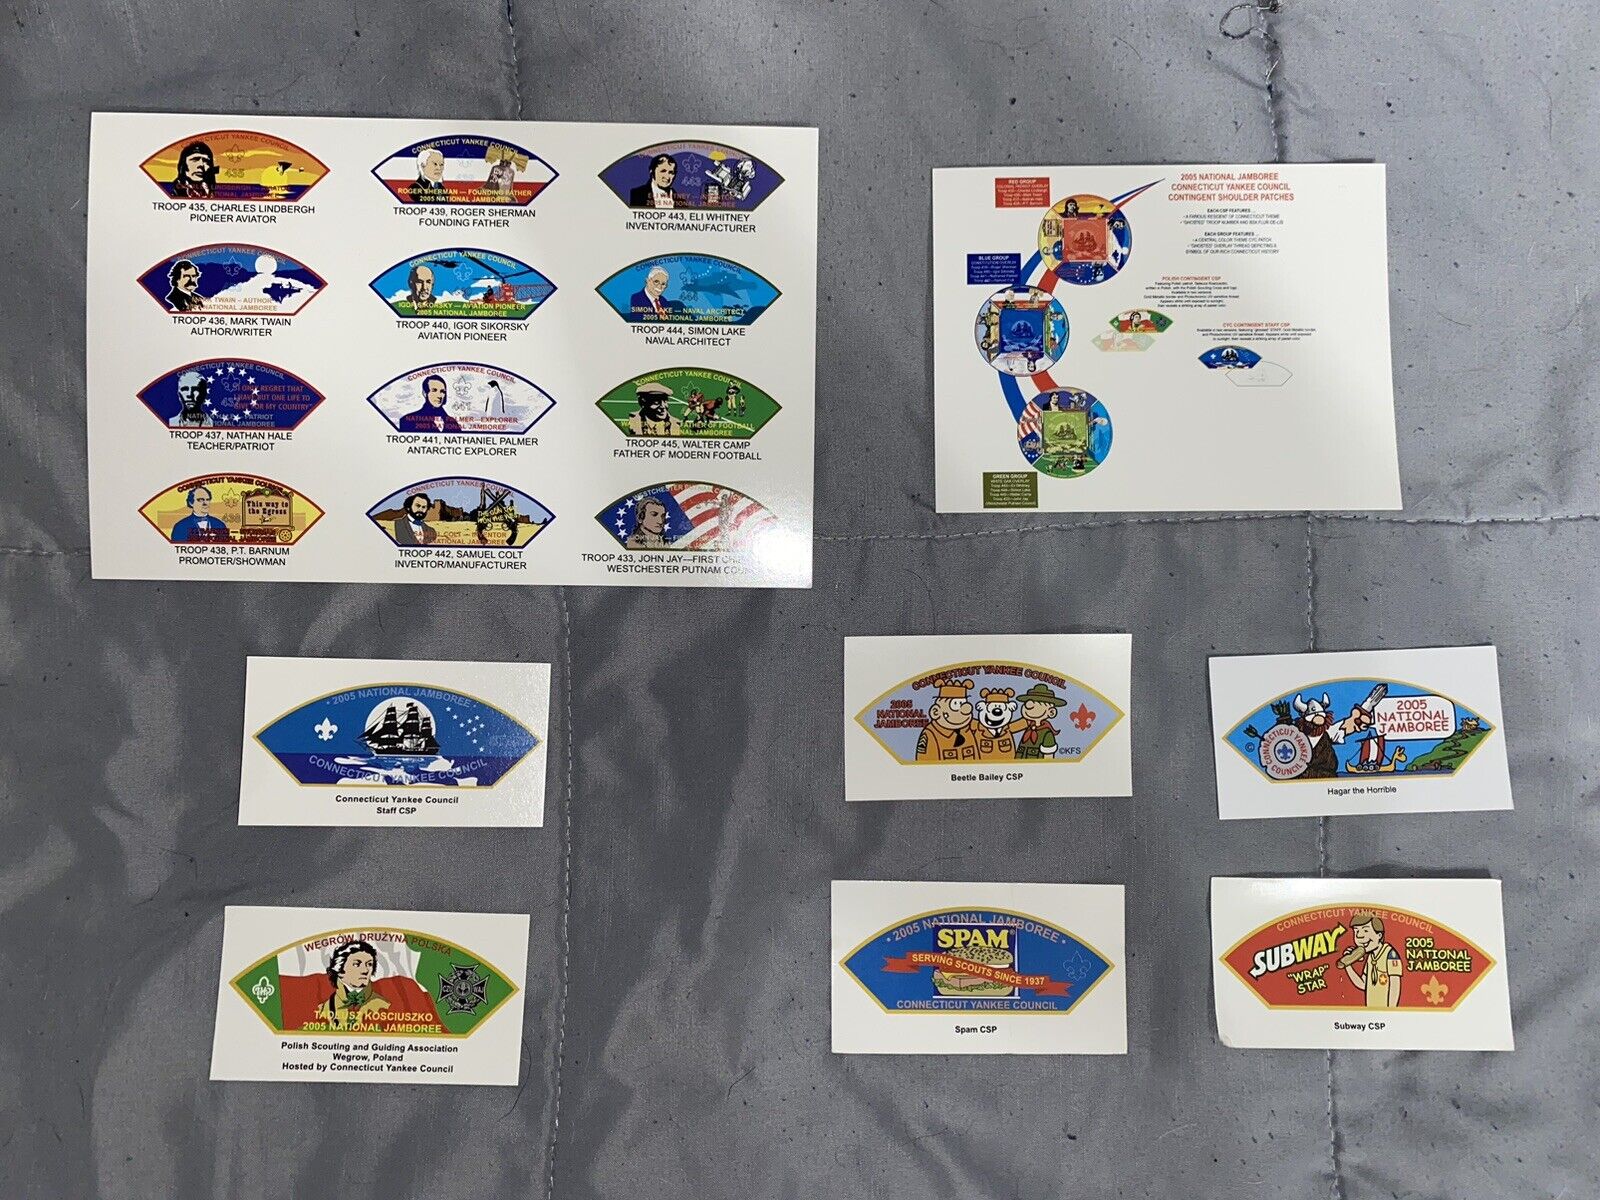 Connecticut Yankee Council - 2005 Jamboree Patch Trading Cards full set